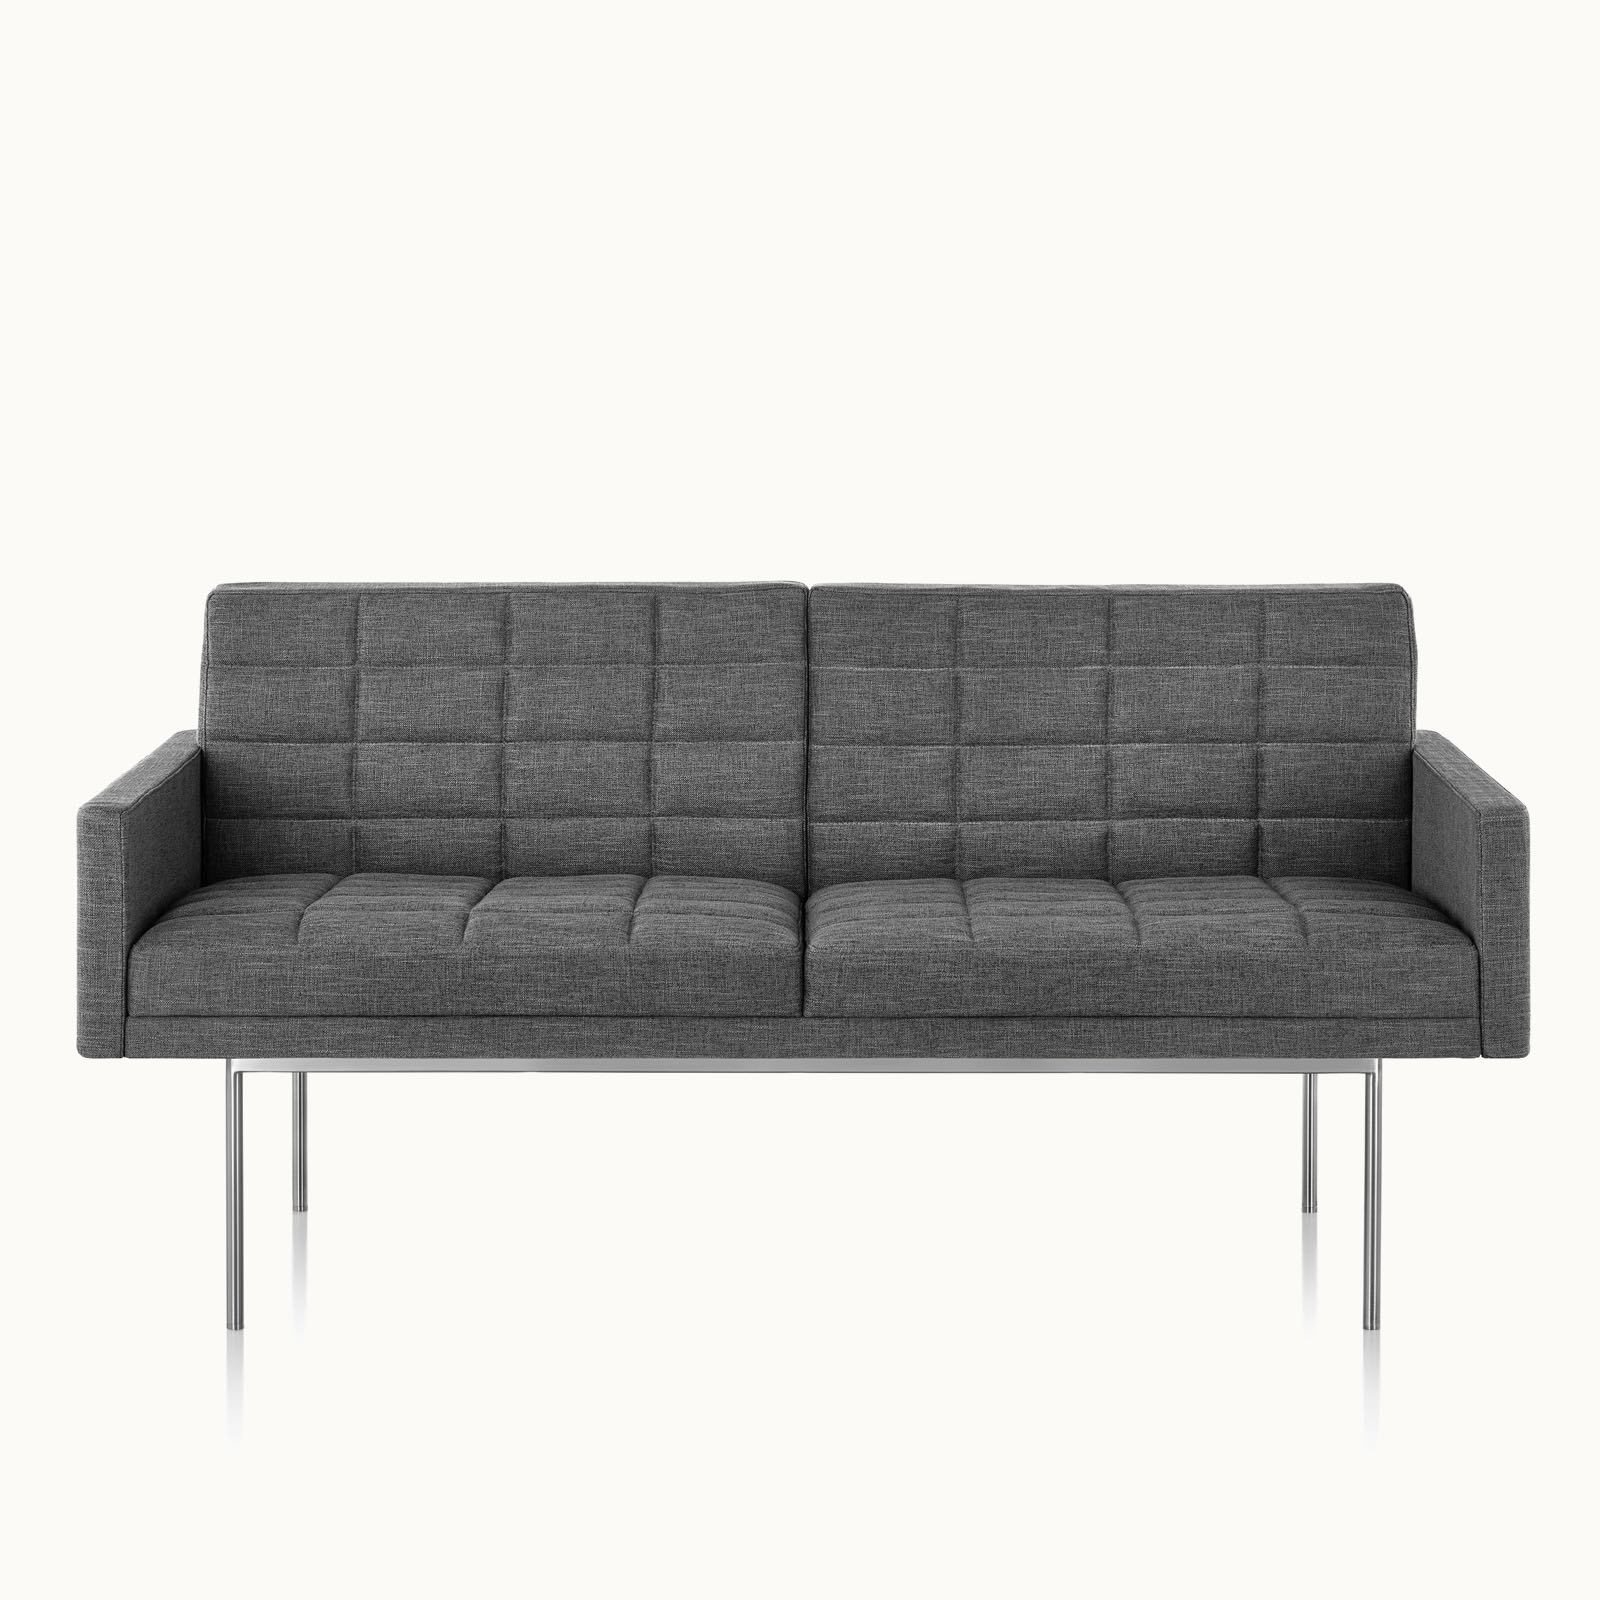 A quilted Tuxedo Component settee upholstered in gray fabric, viewed from the front.